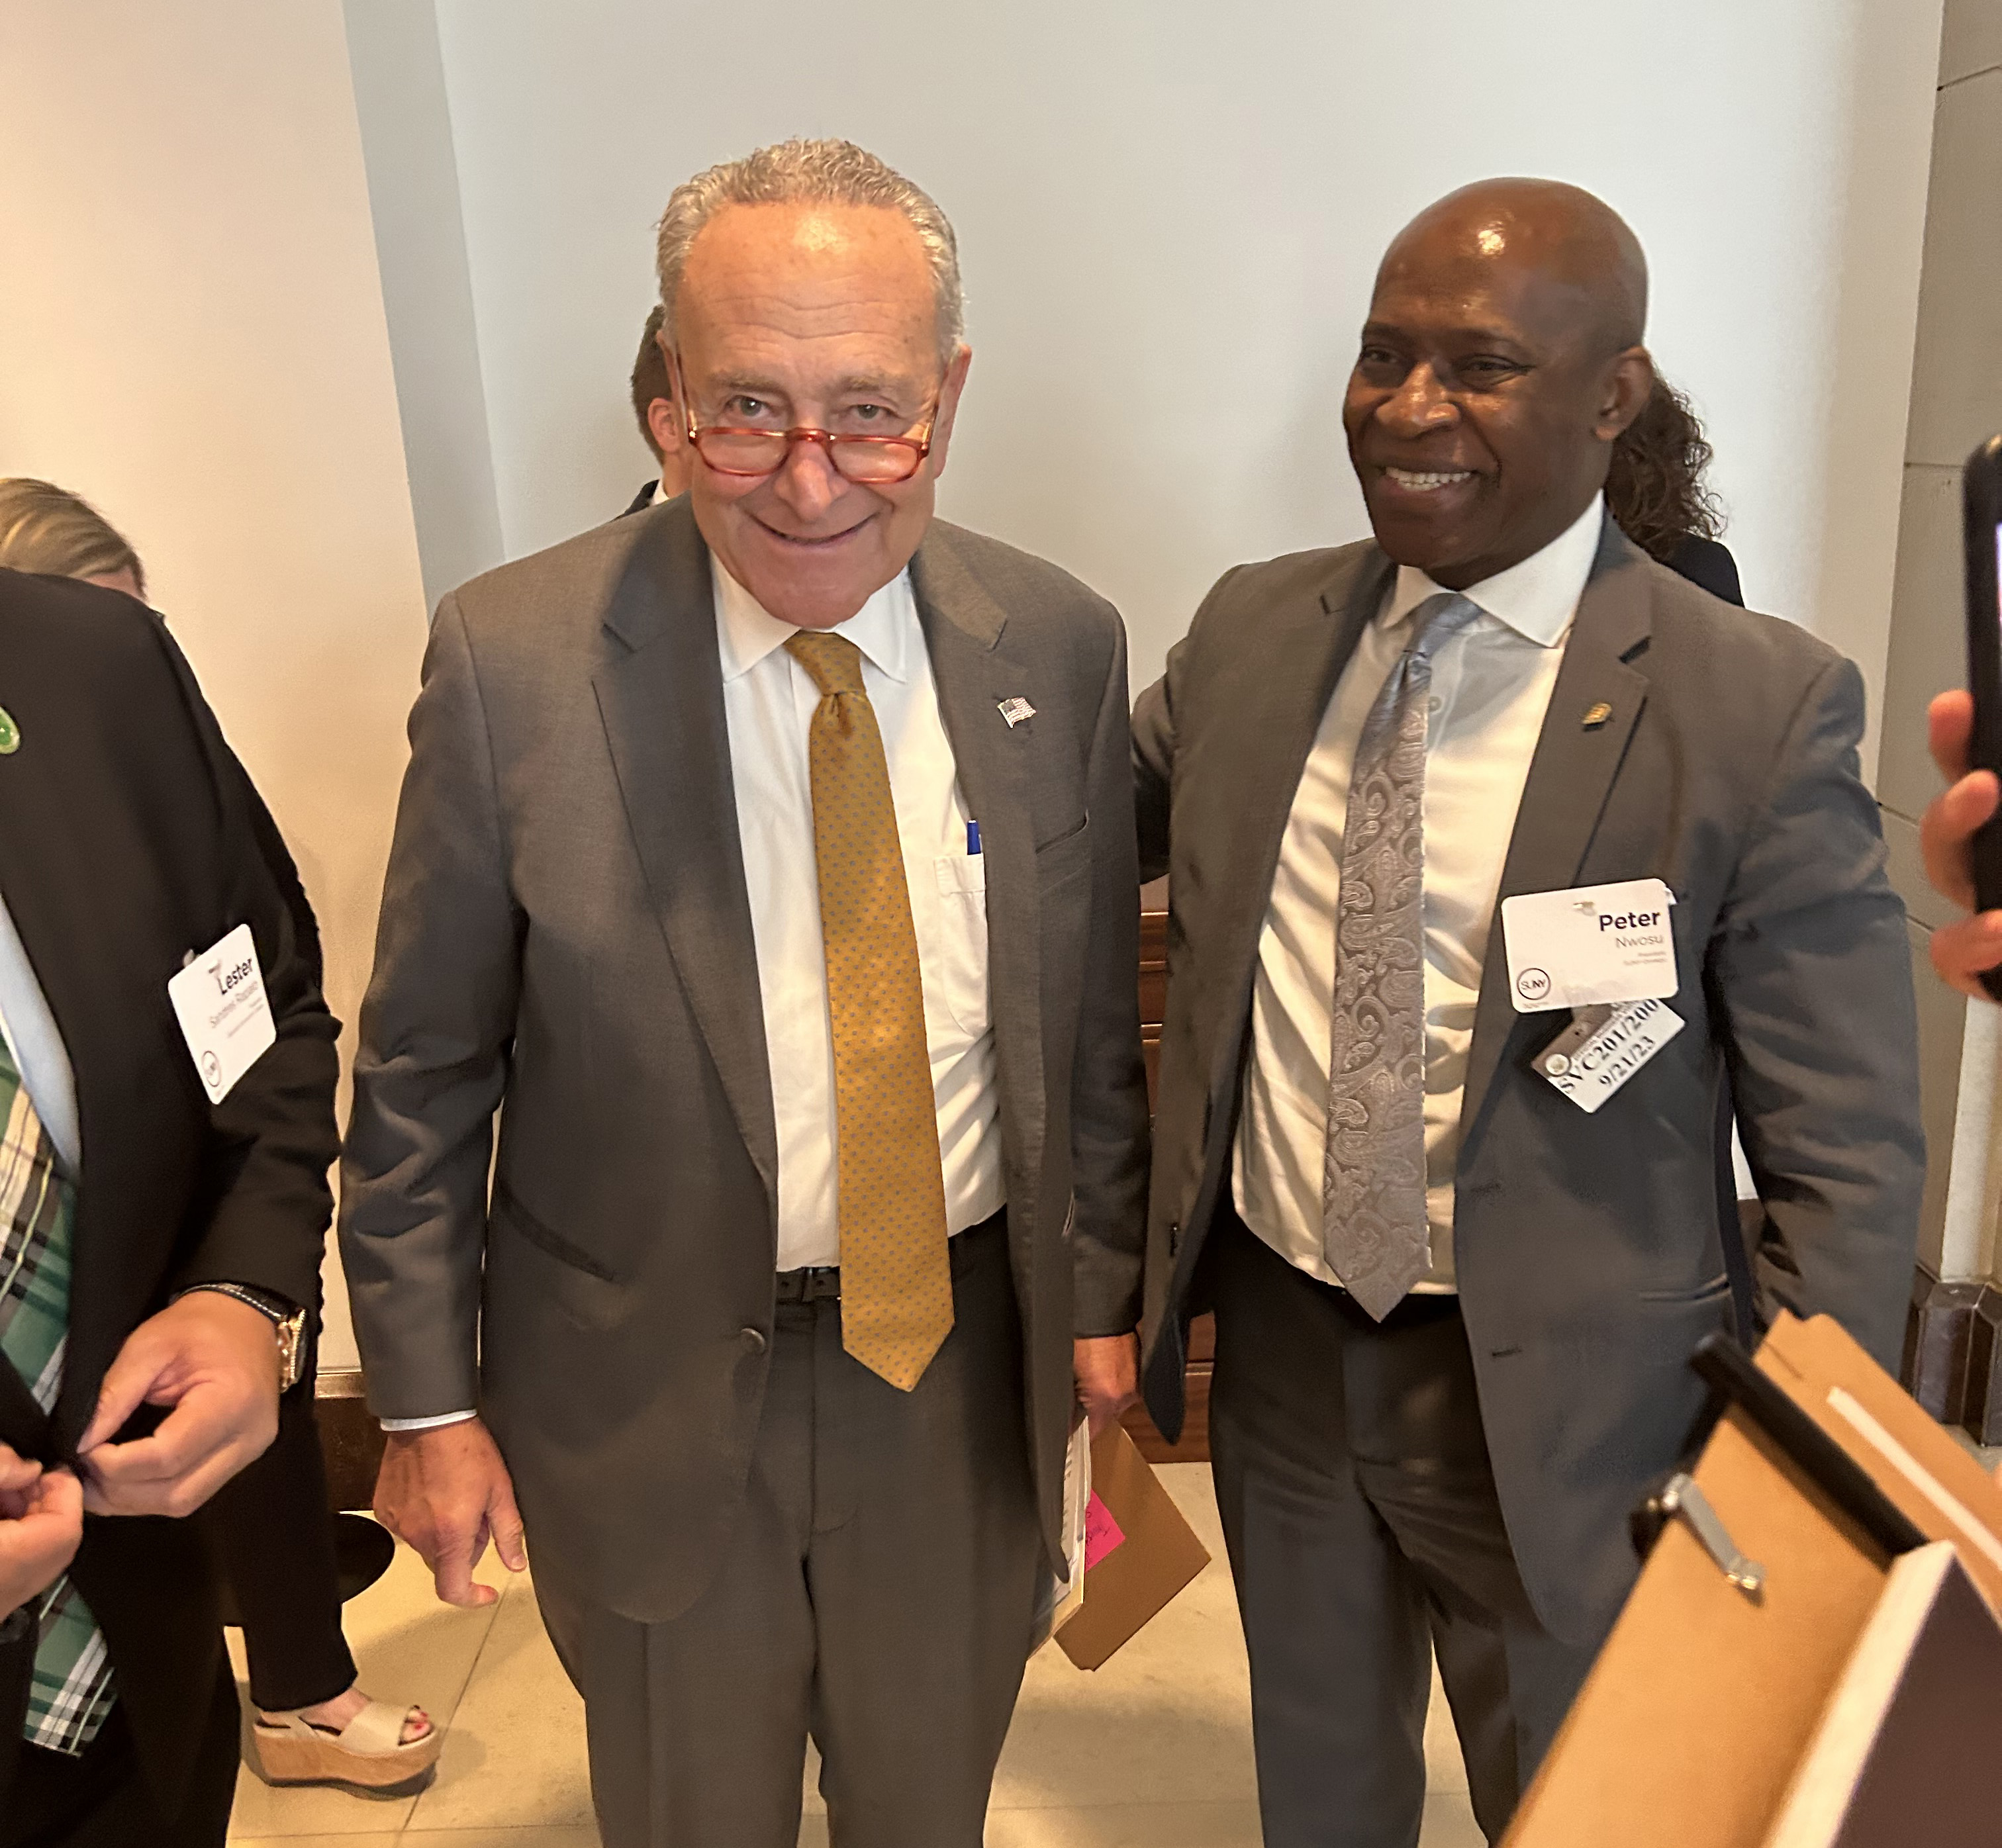 During SUNY D.C. Day, SUNY Oswego President Peter O. Nwosu and  Assistant Vice President of Workforce Innovation and External Relations Kristi Eck met with representatives including U.S. Senator and Majority Leader Charles Schumer.